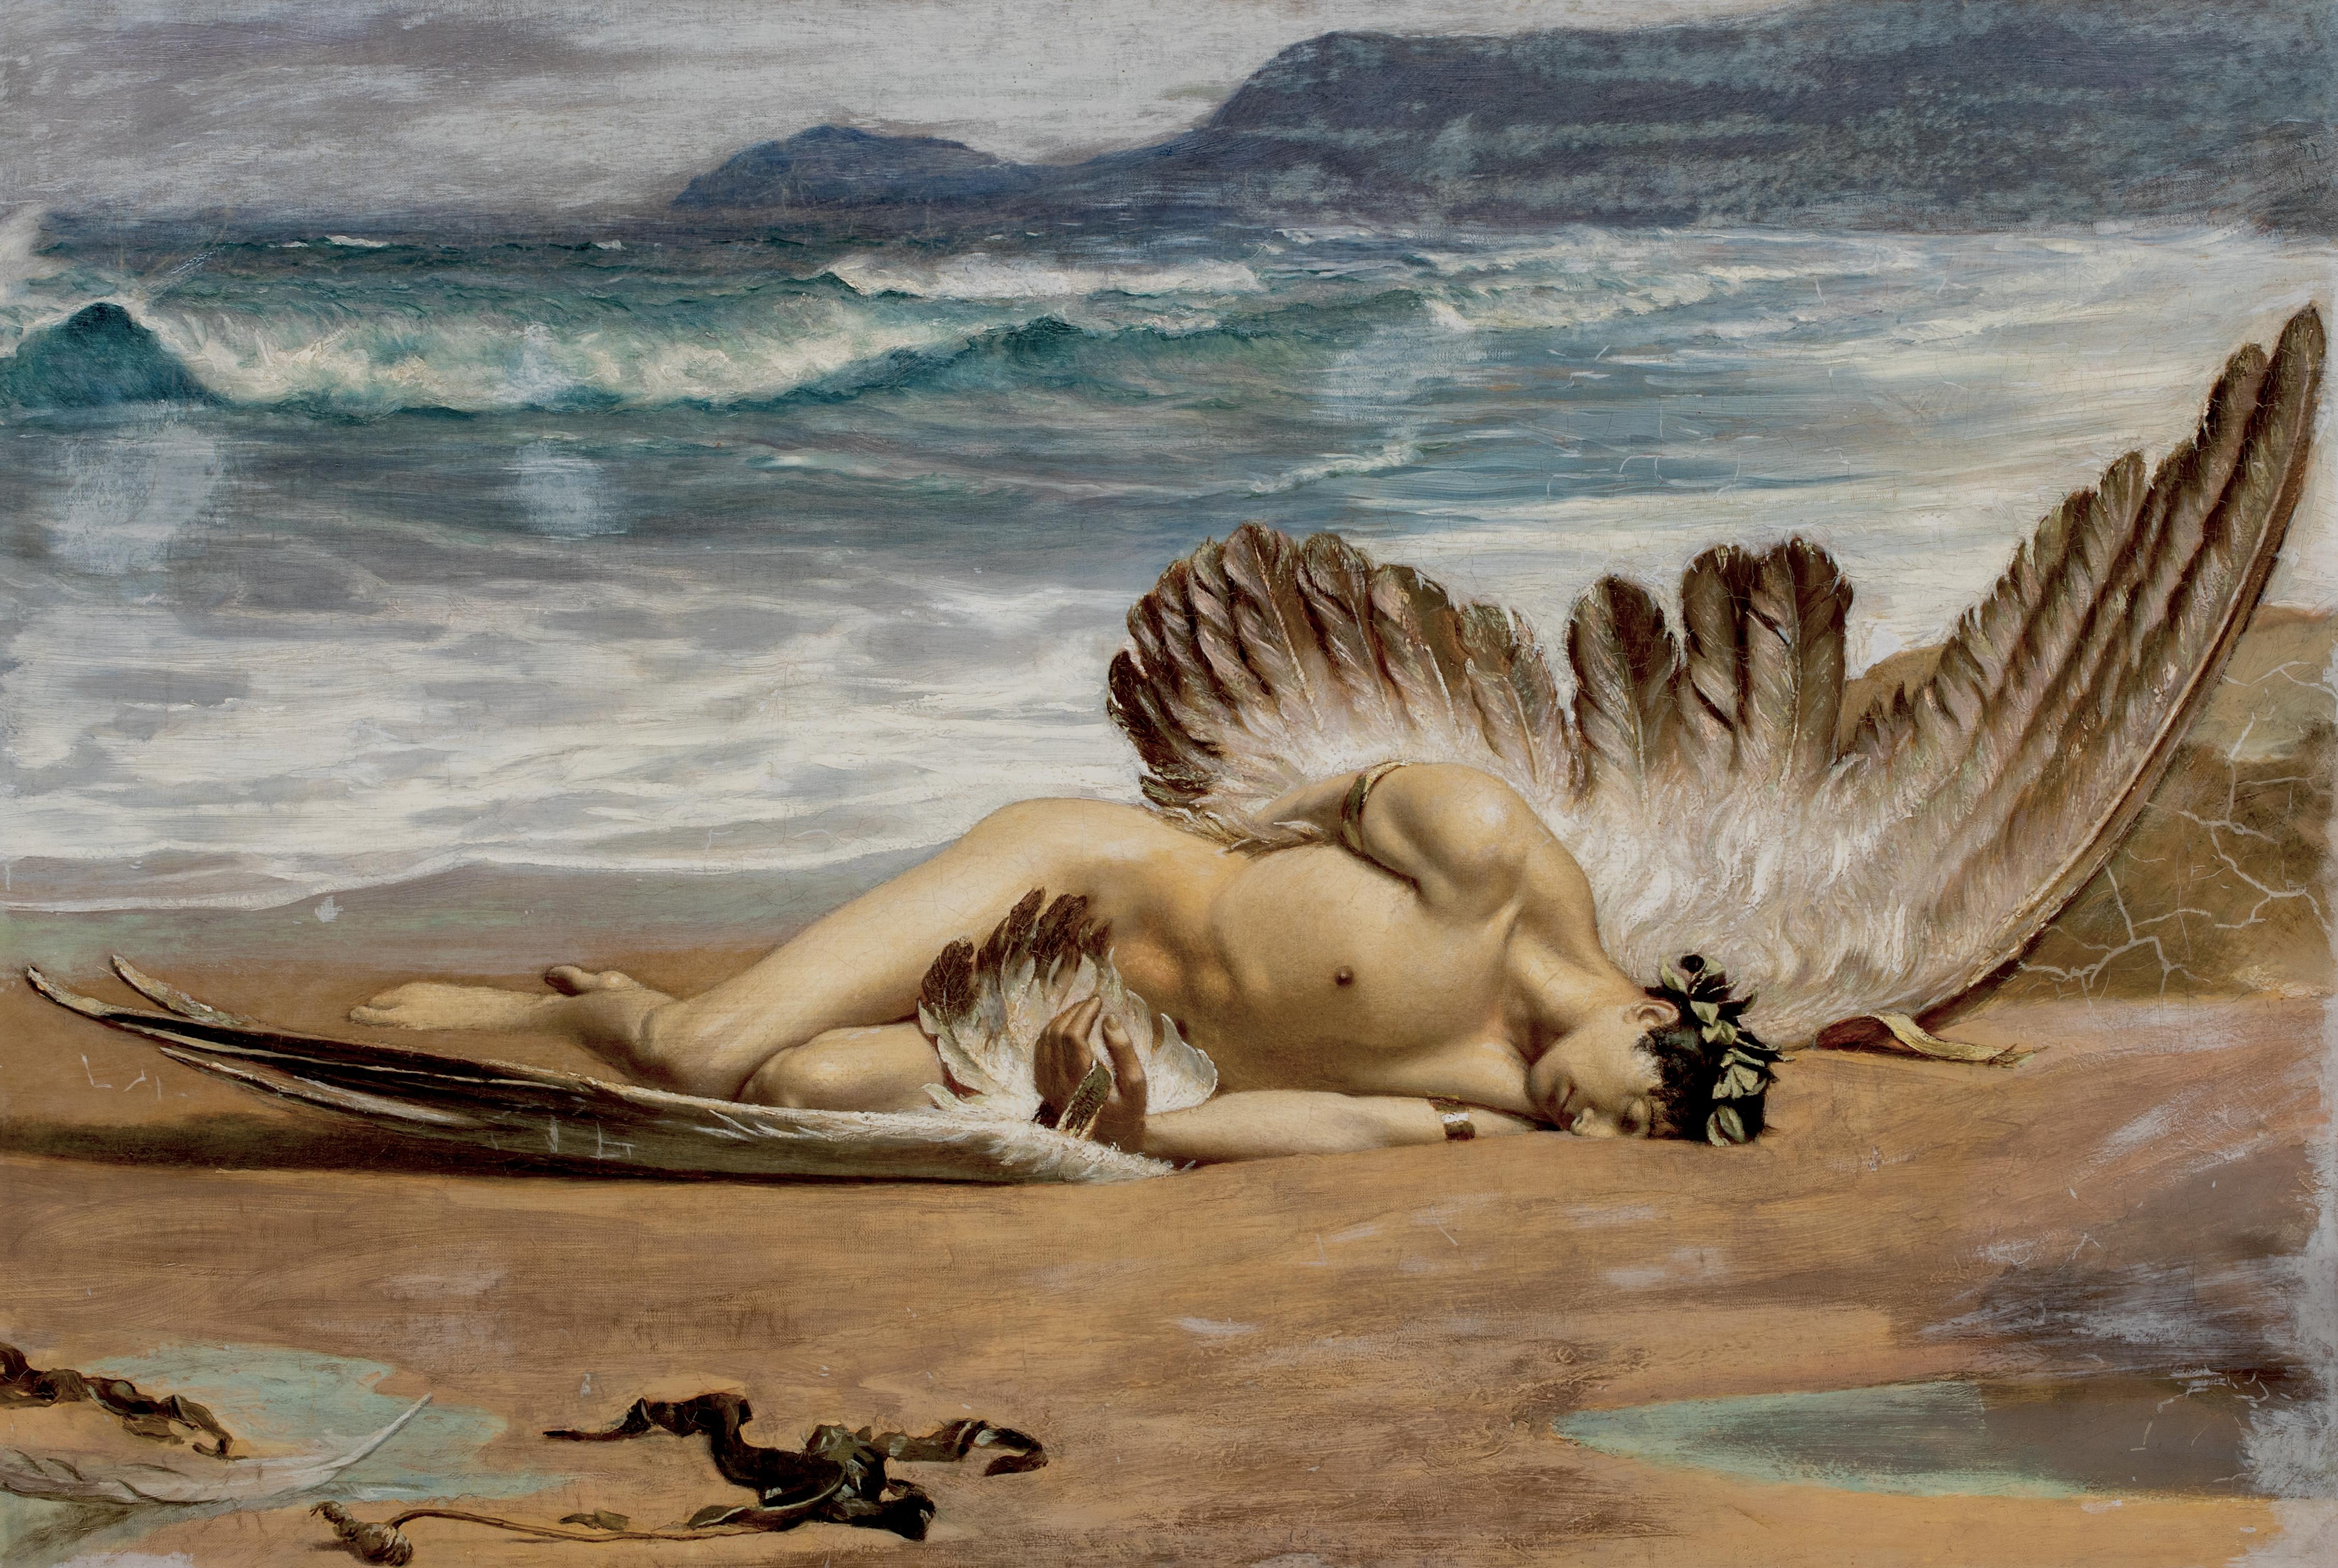 The Death Of Icarus, 19th Century

circle of Alexandre CABANEL (1823-1889)

Large 19th Century French classical scene of The Death Of Icarus, oil on canvas circle of Alexandre Cabanel. Excellent quality and condition scene of the body of Icarus